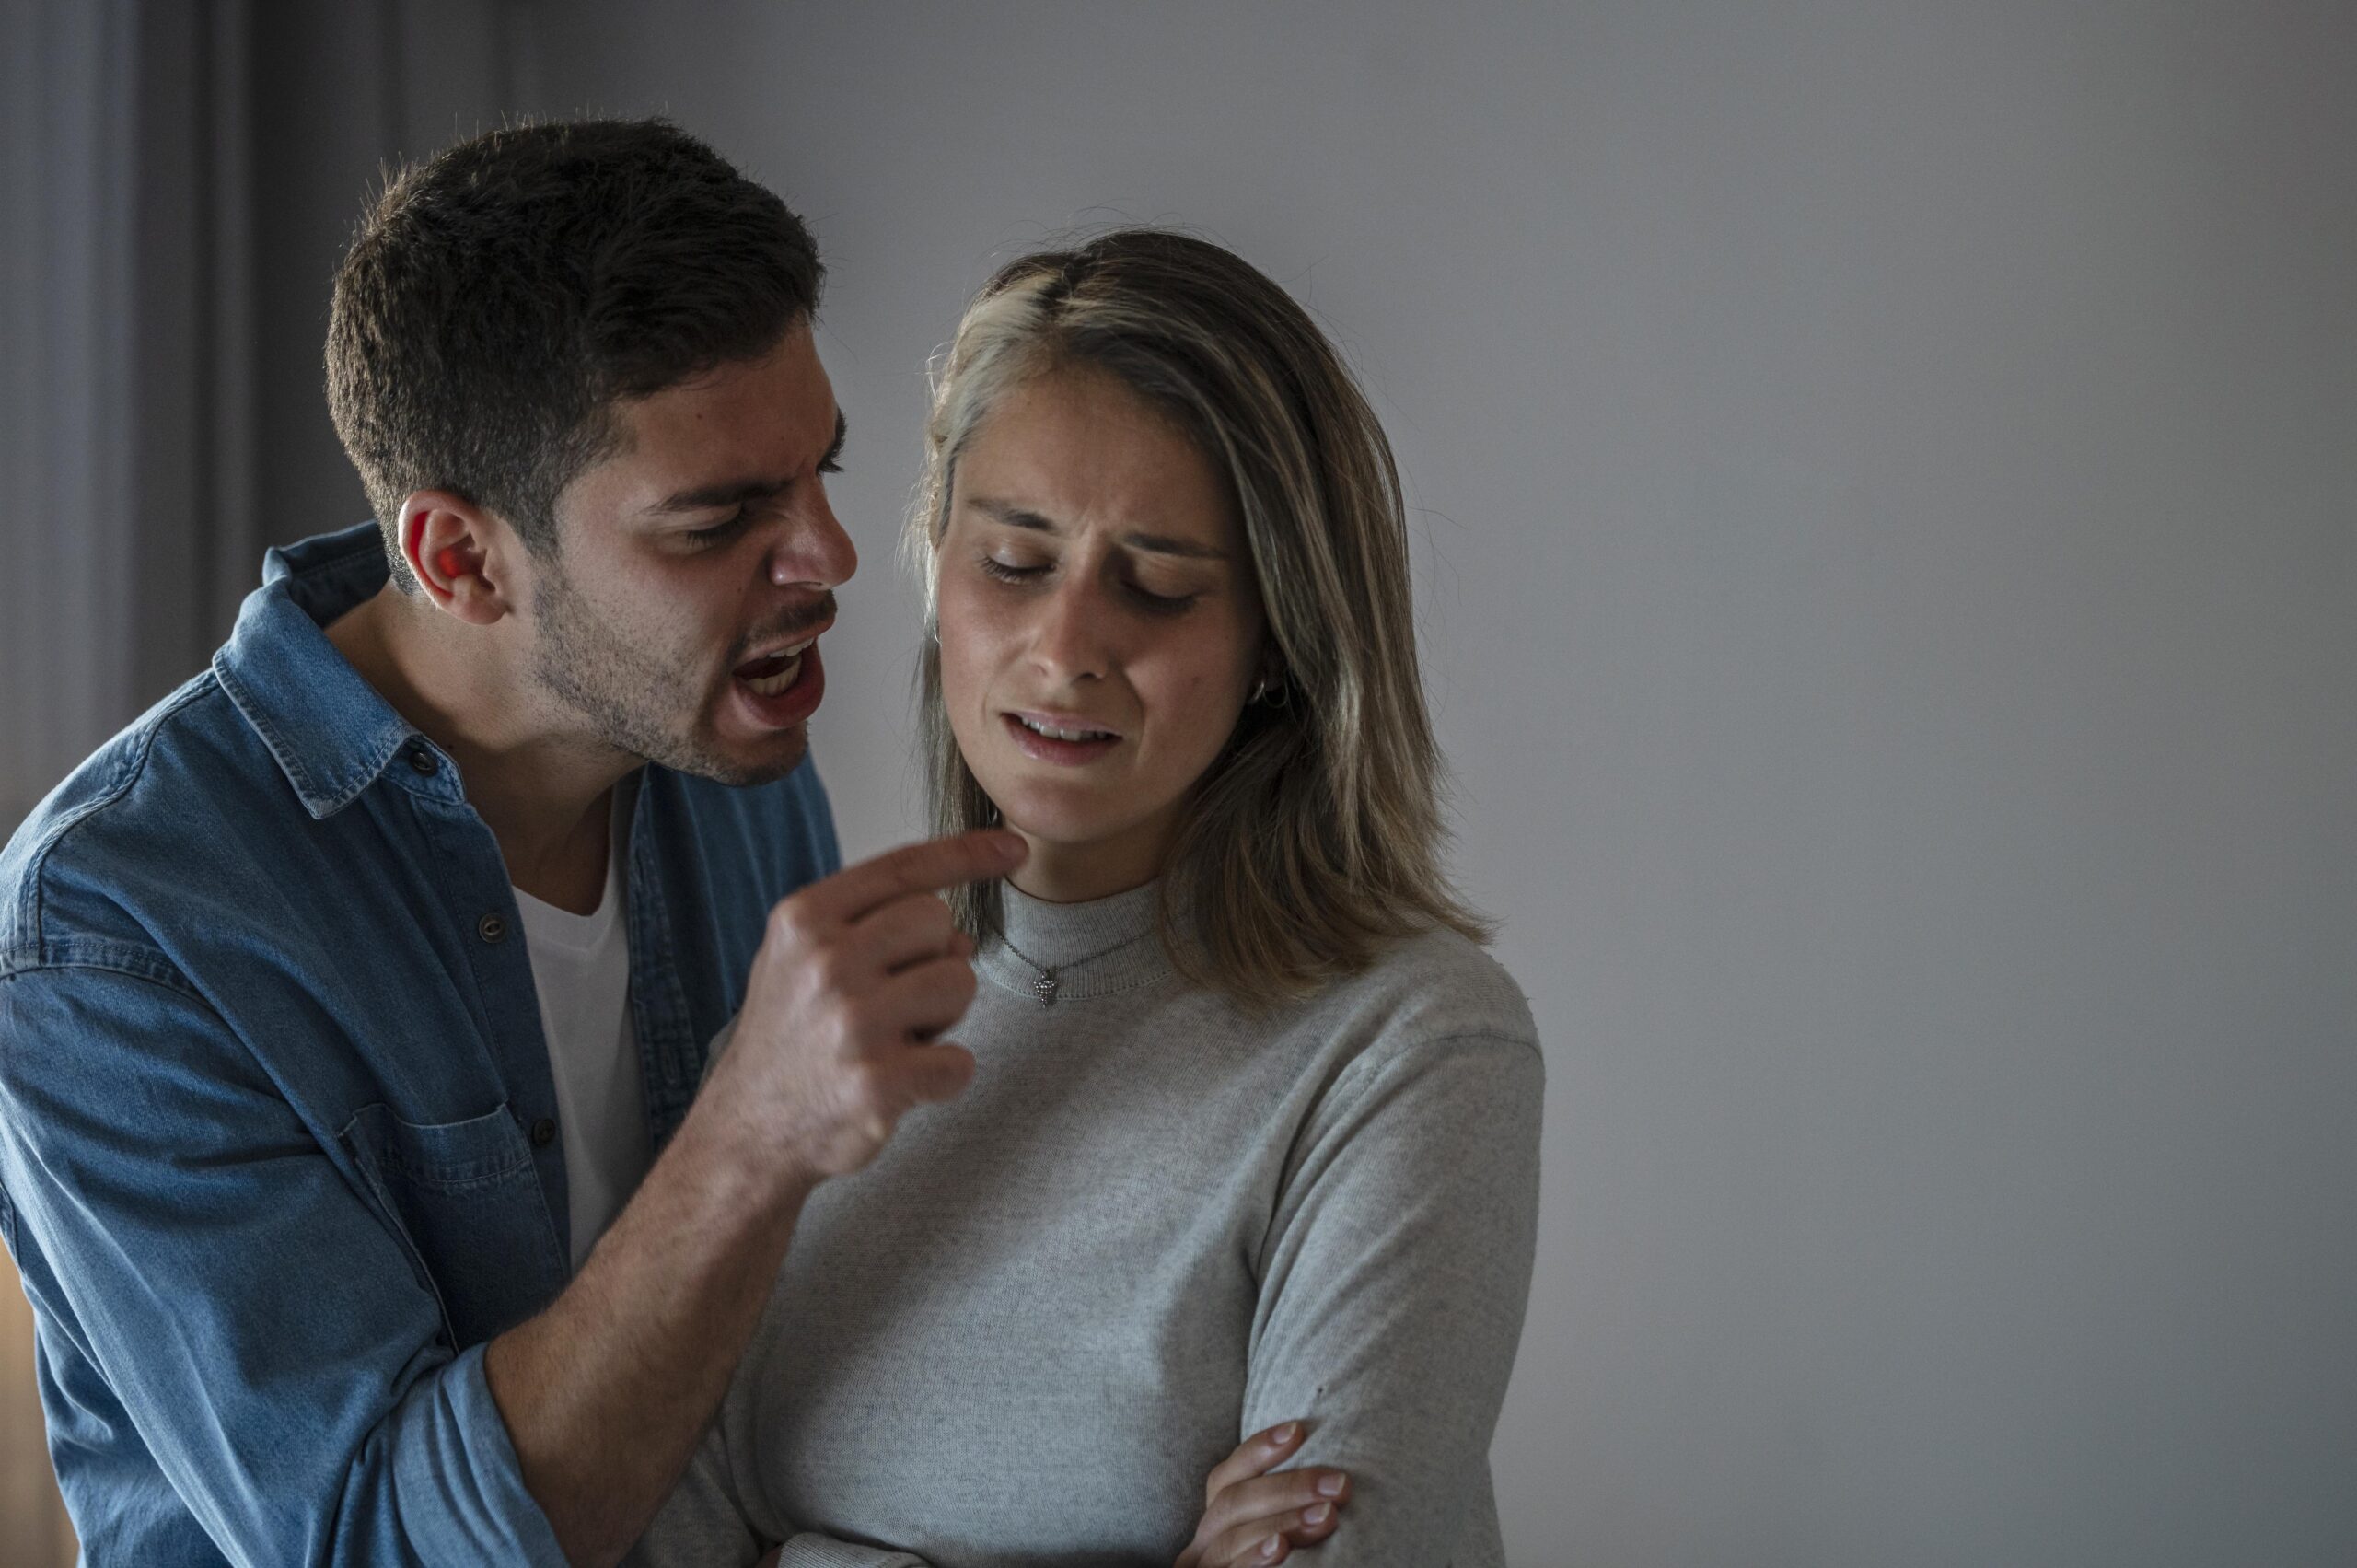 husband hurting wife quotes - husband yelling